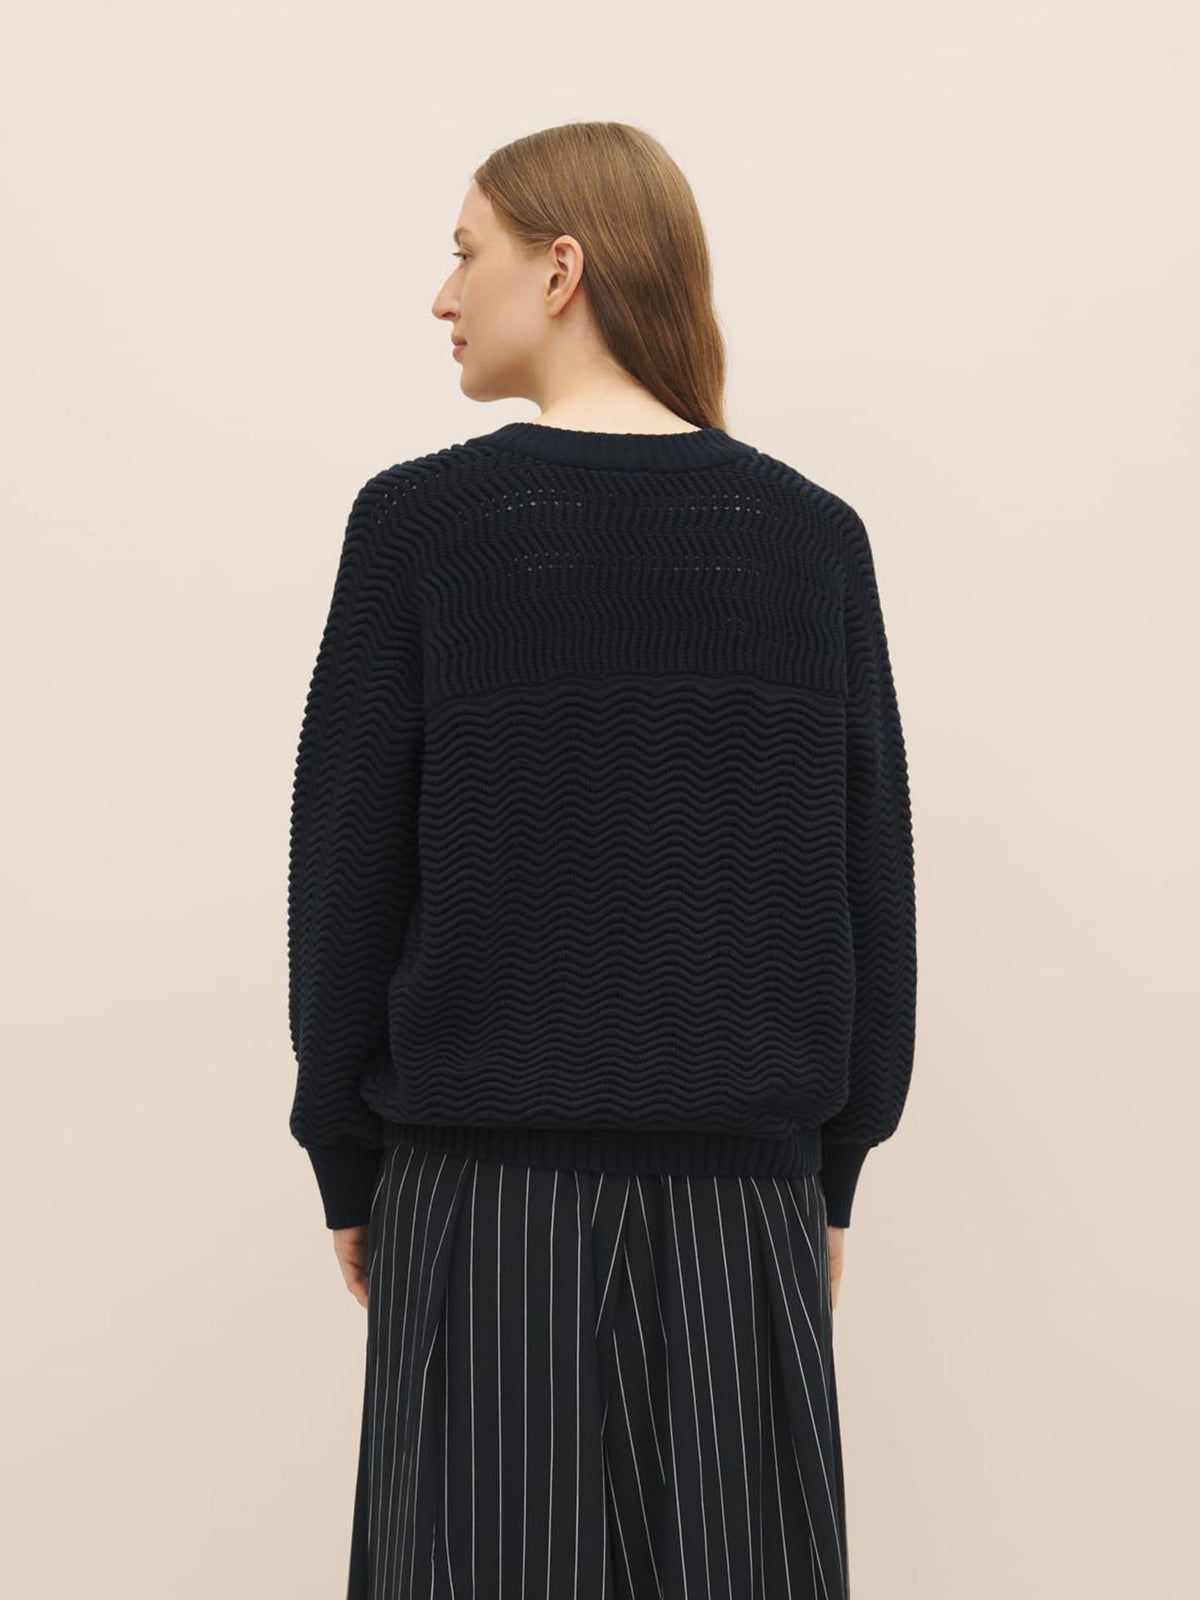 Woman from behind wearing a black rib knit sweater and striped pants against a neutral background, featuring the Zig Zag Crew – Indigo by Kowtow.